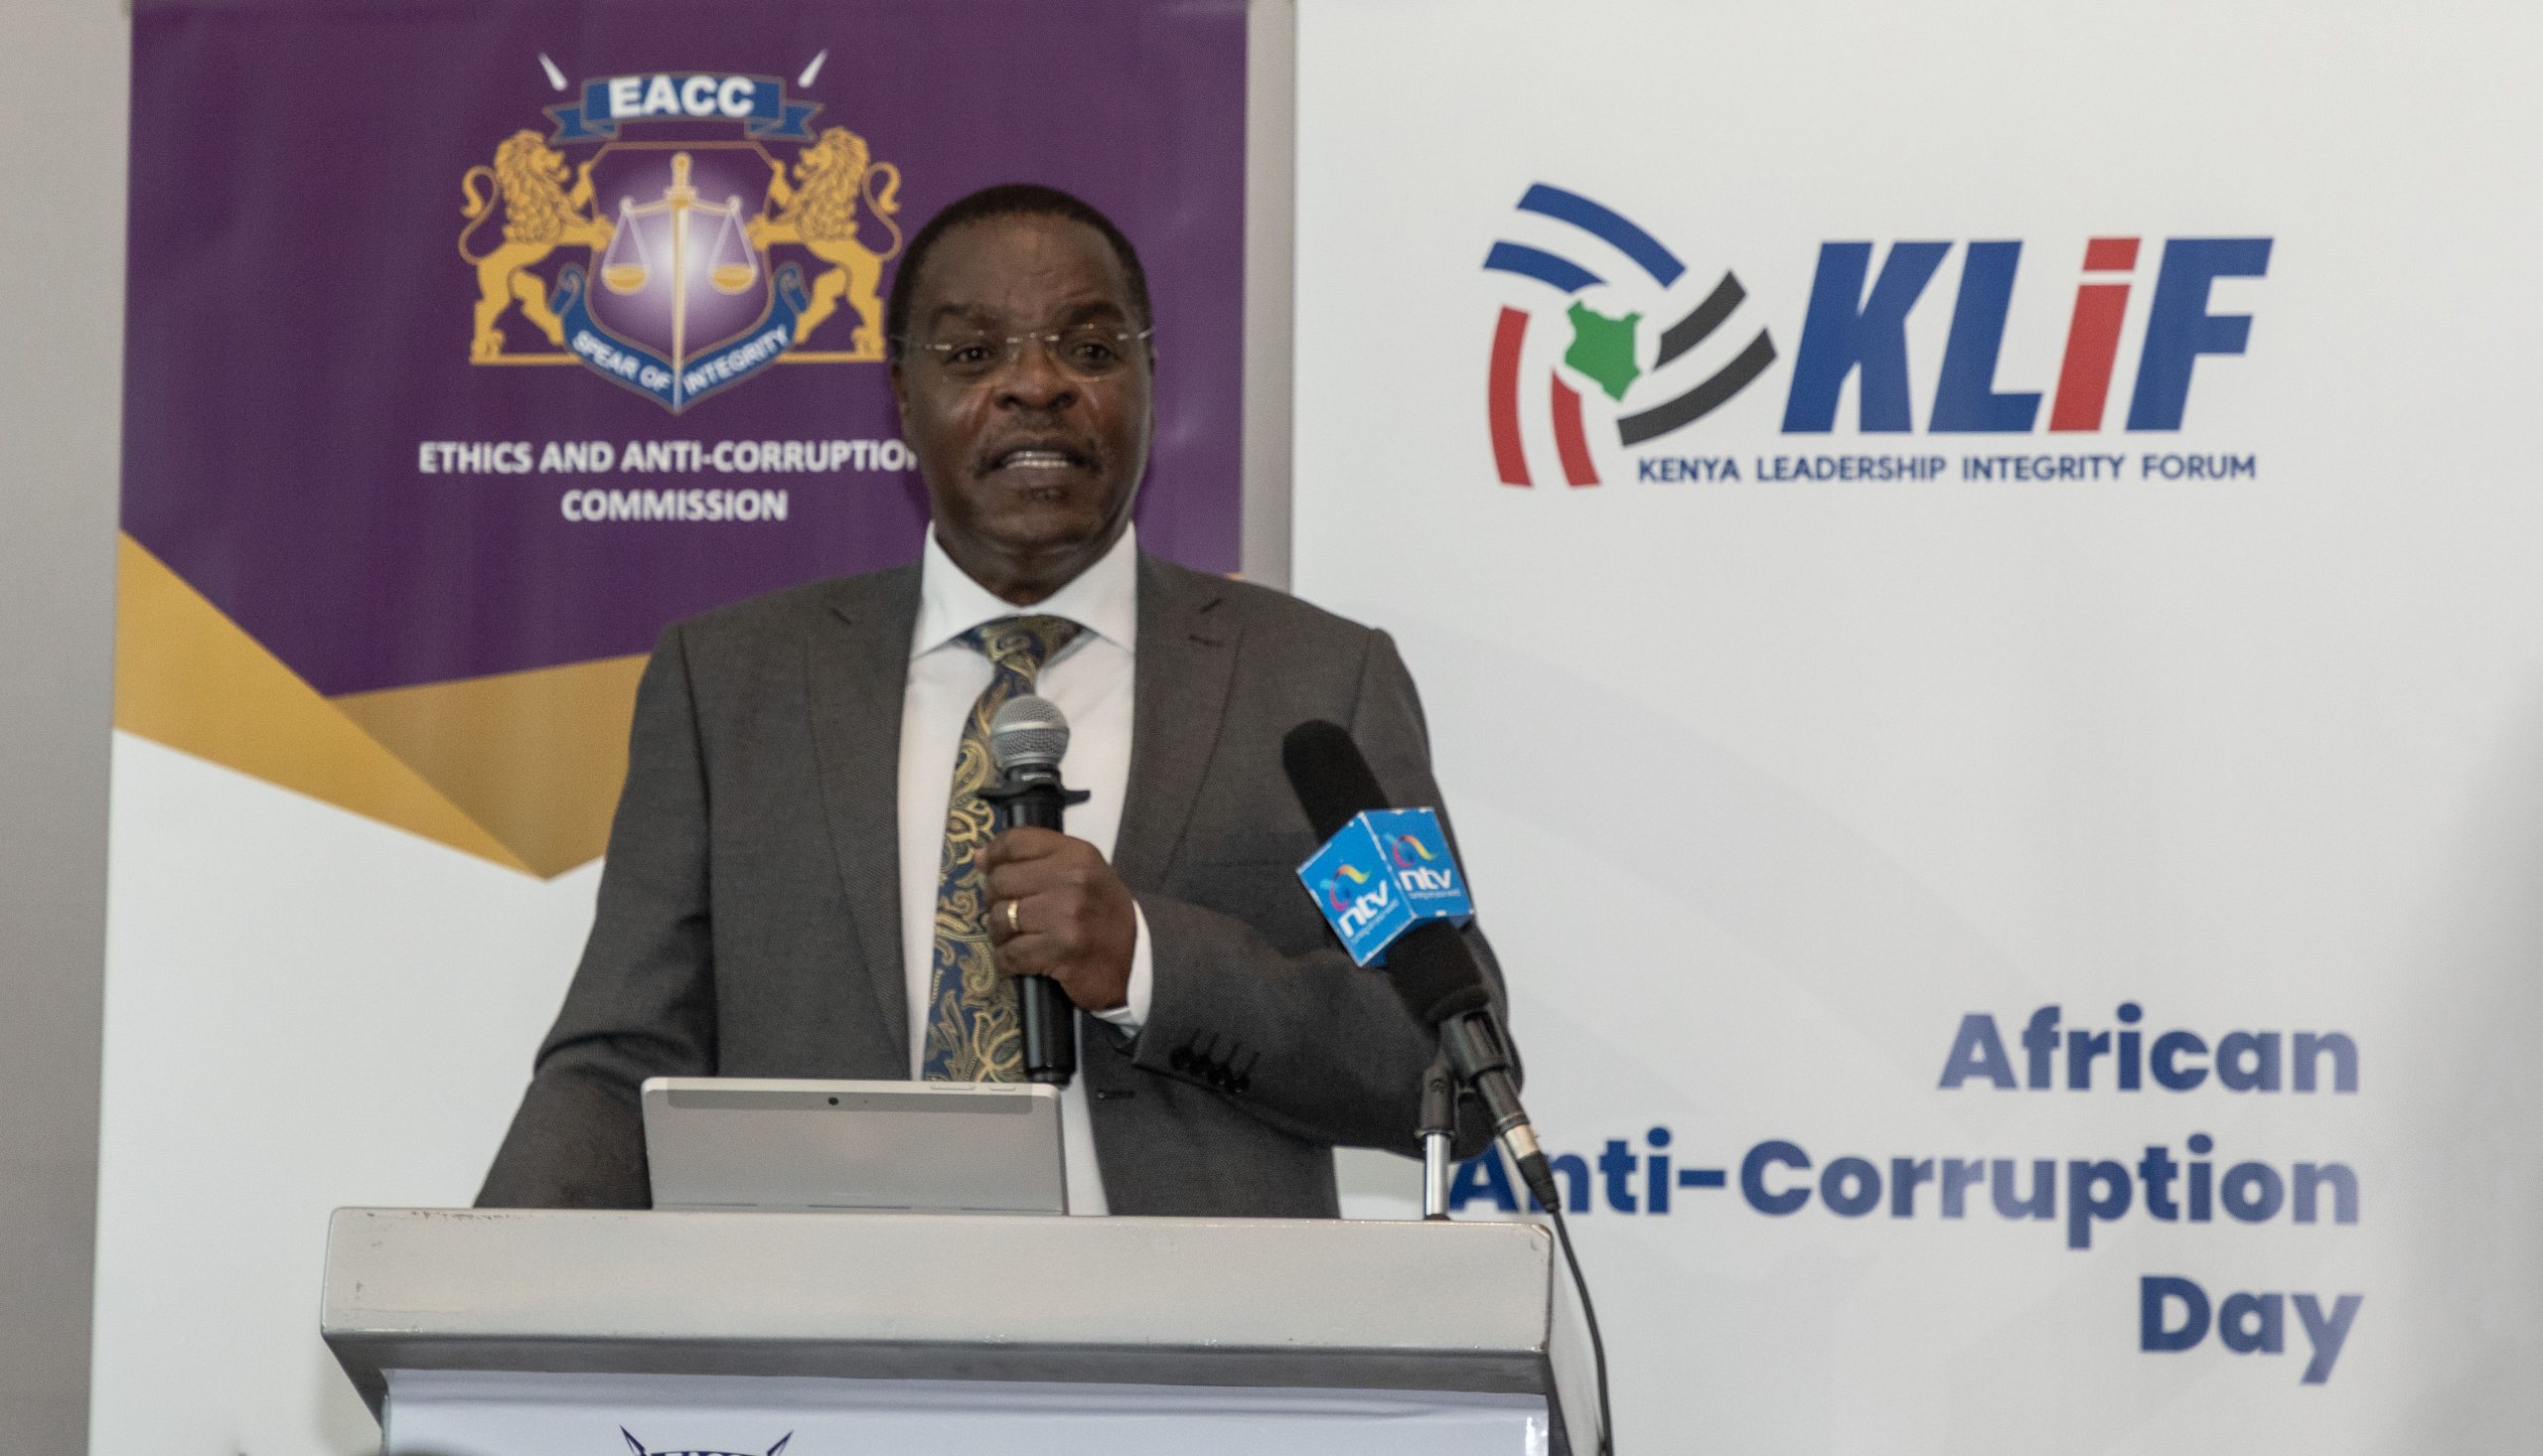 Kenya observes African Anti-Corruption Day with focus on strengthening whistleblower mechanisms